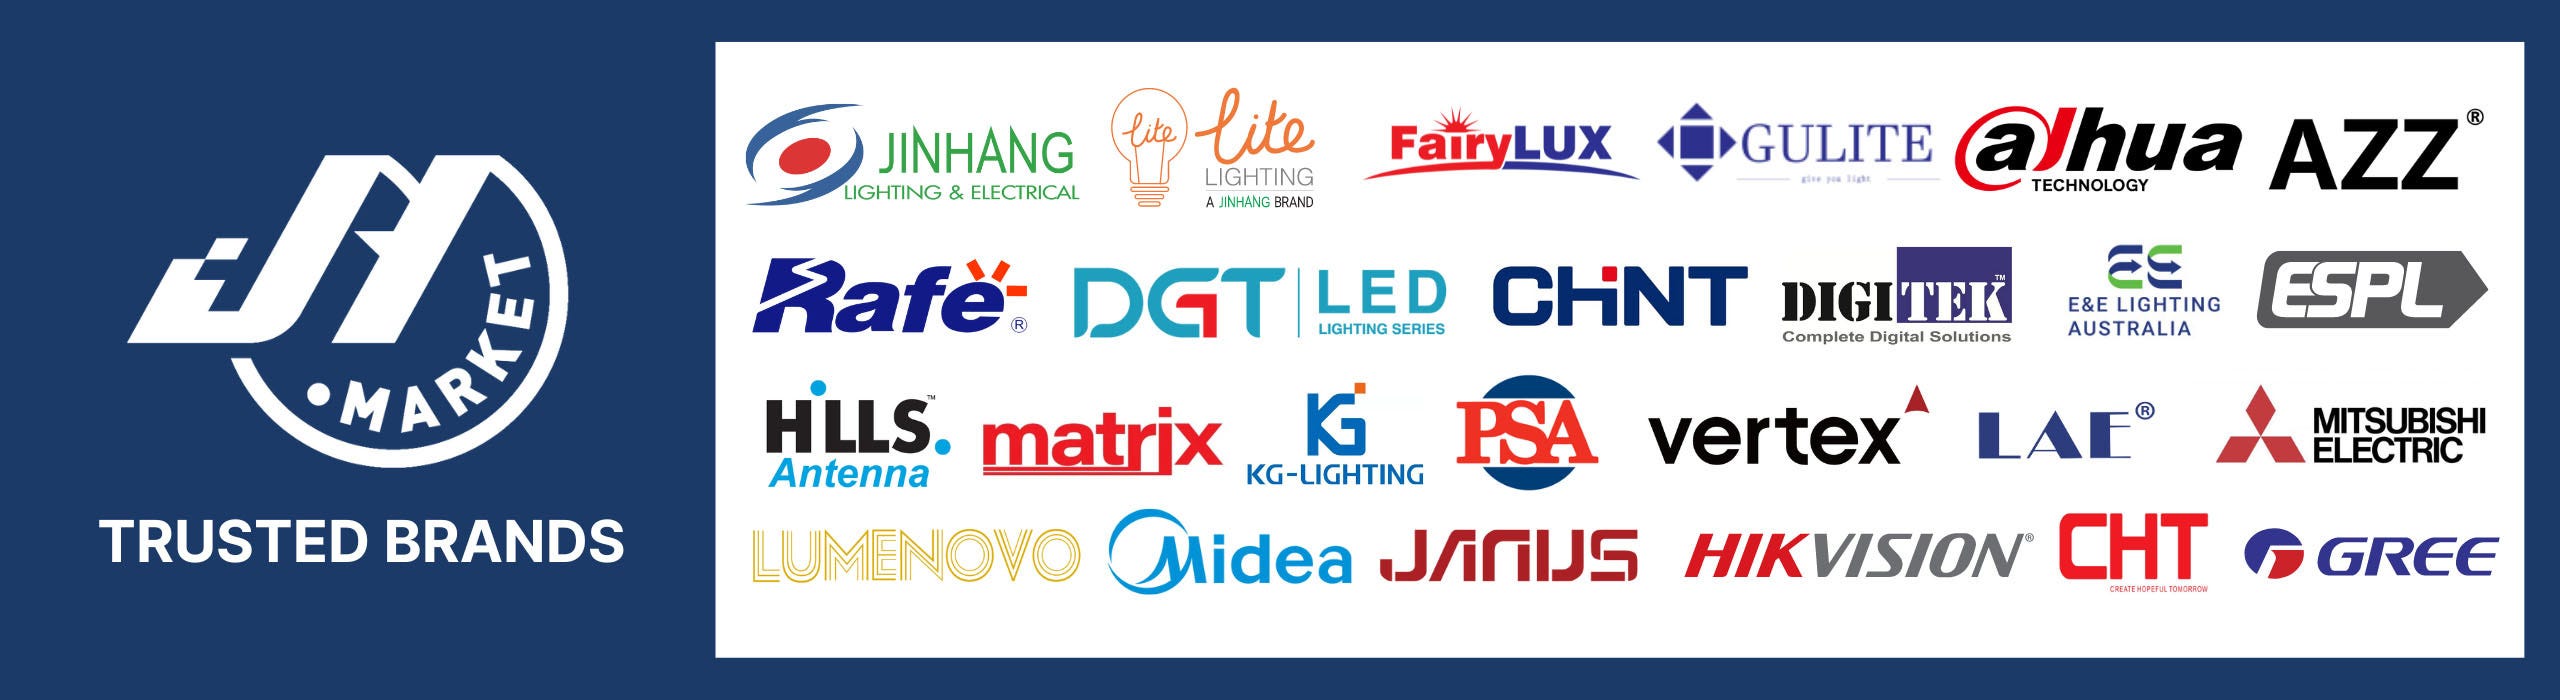 a banner showing the many trusted brands in JH Market, like Jinhang, Lite Lighting, Rafe, DGT, Hills, Matrix, Midea, FairyLUX, Gulite, and Mitsubishi Electric